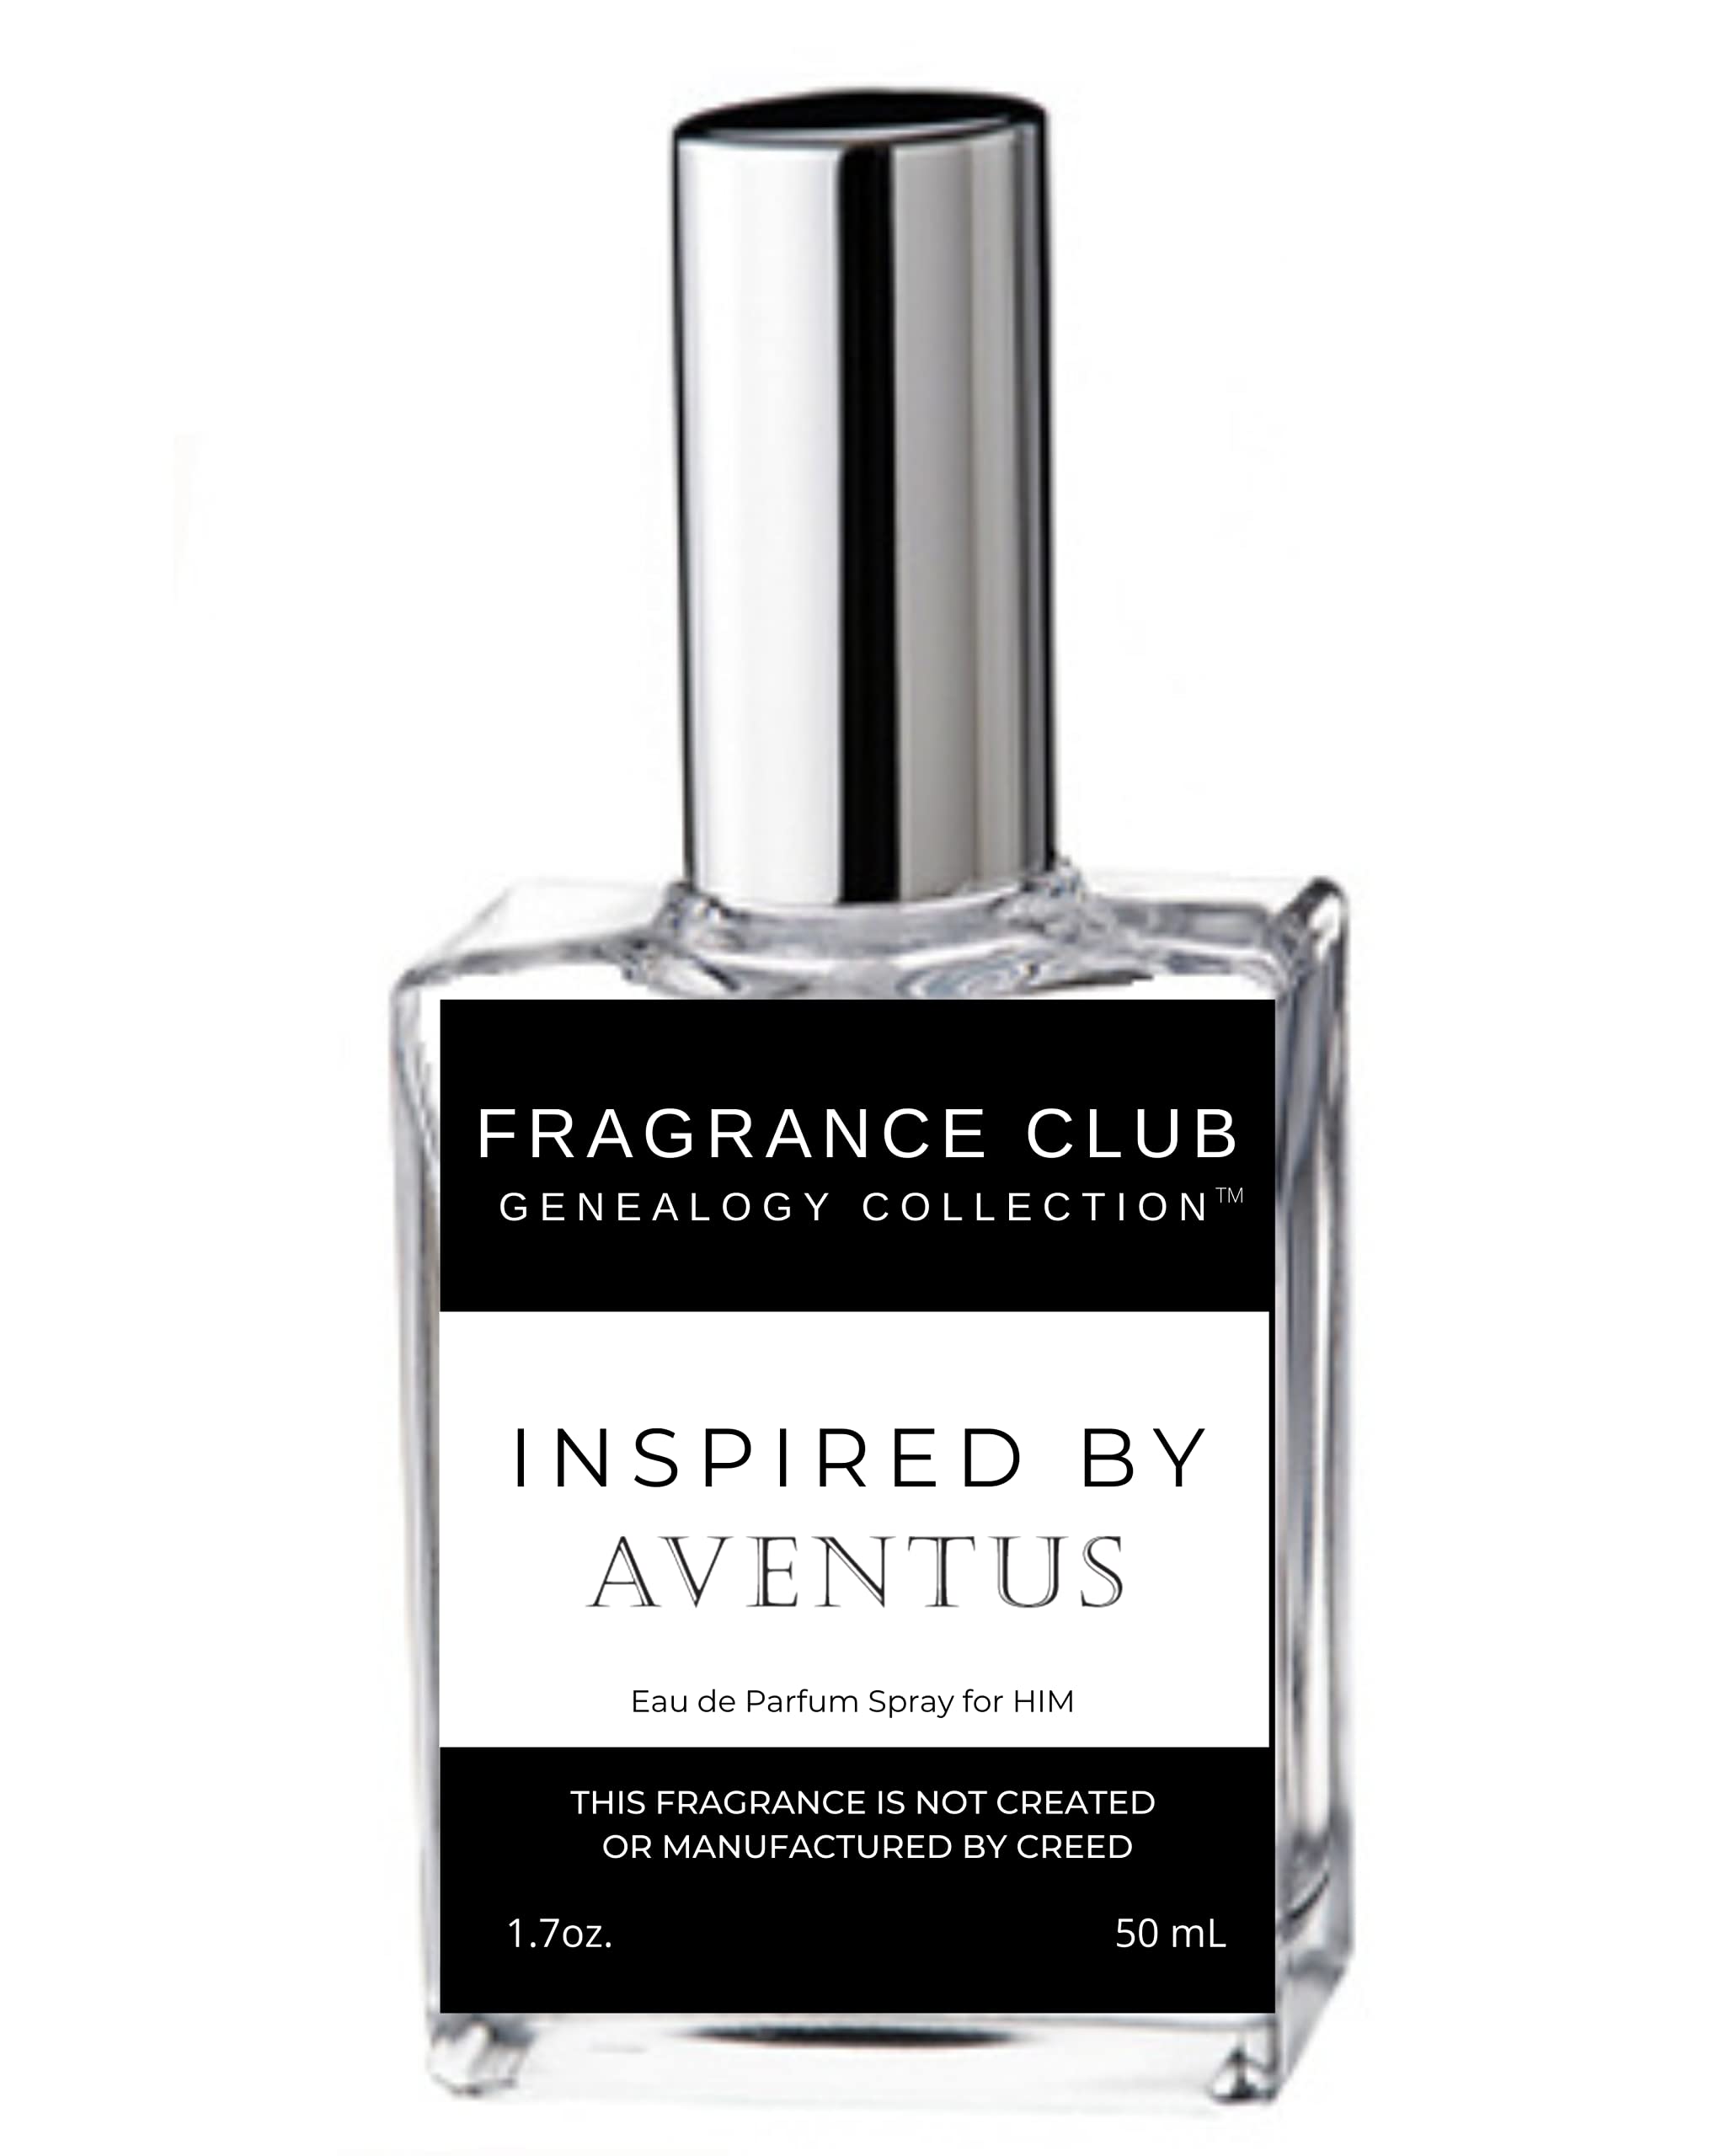 Fragrance club genealogy collection Inspired by Aventus for Men, 17 oz EDP Mens fragrance with Jasmine, Velvety Woods and Musk I